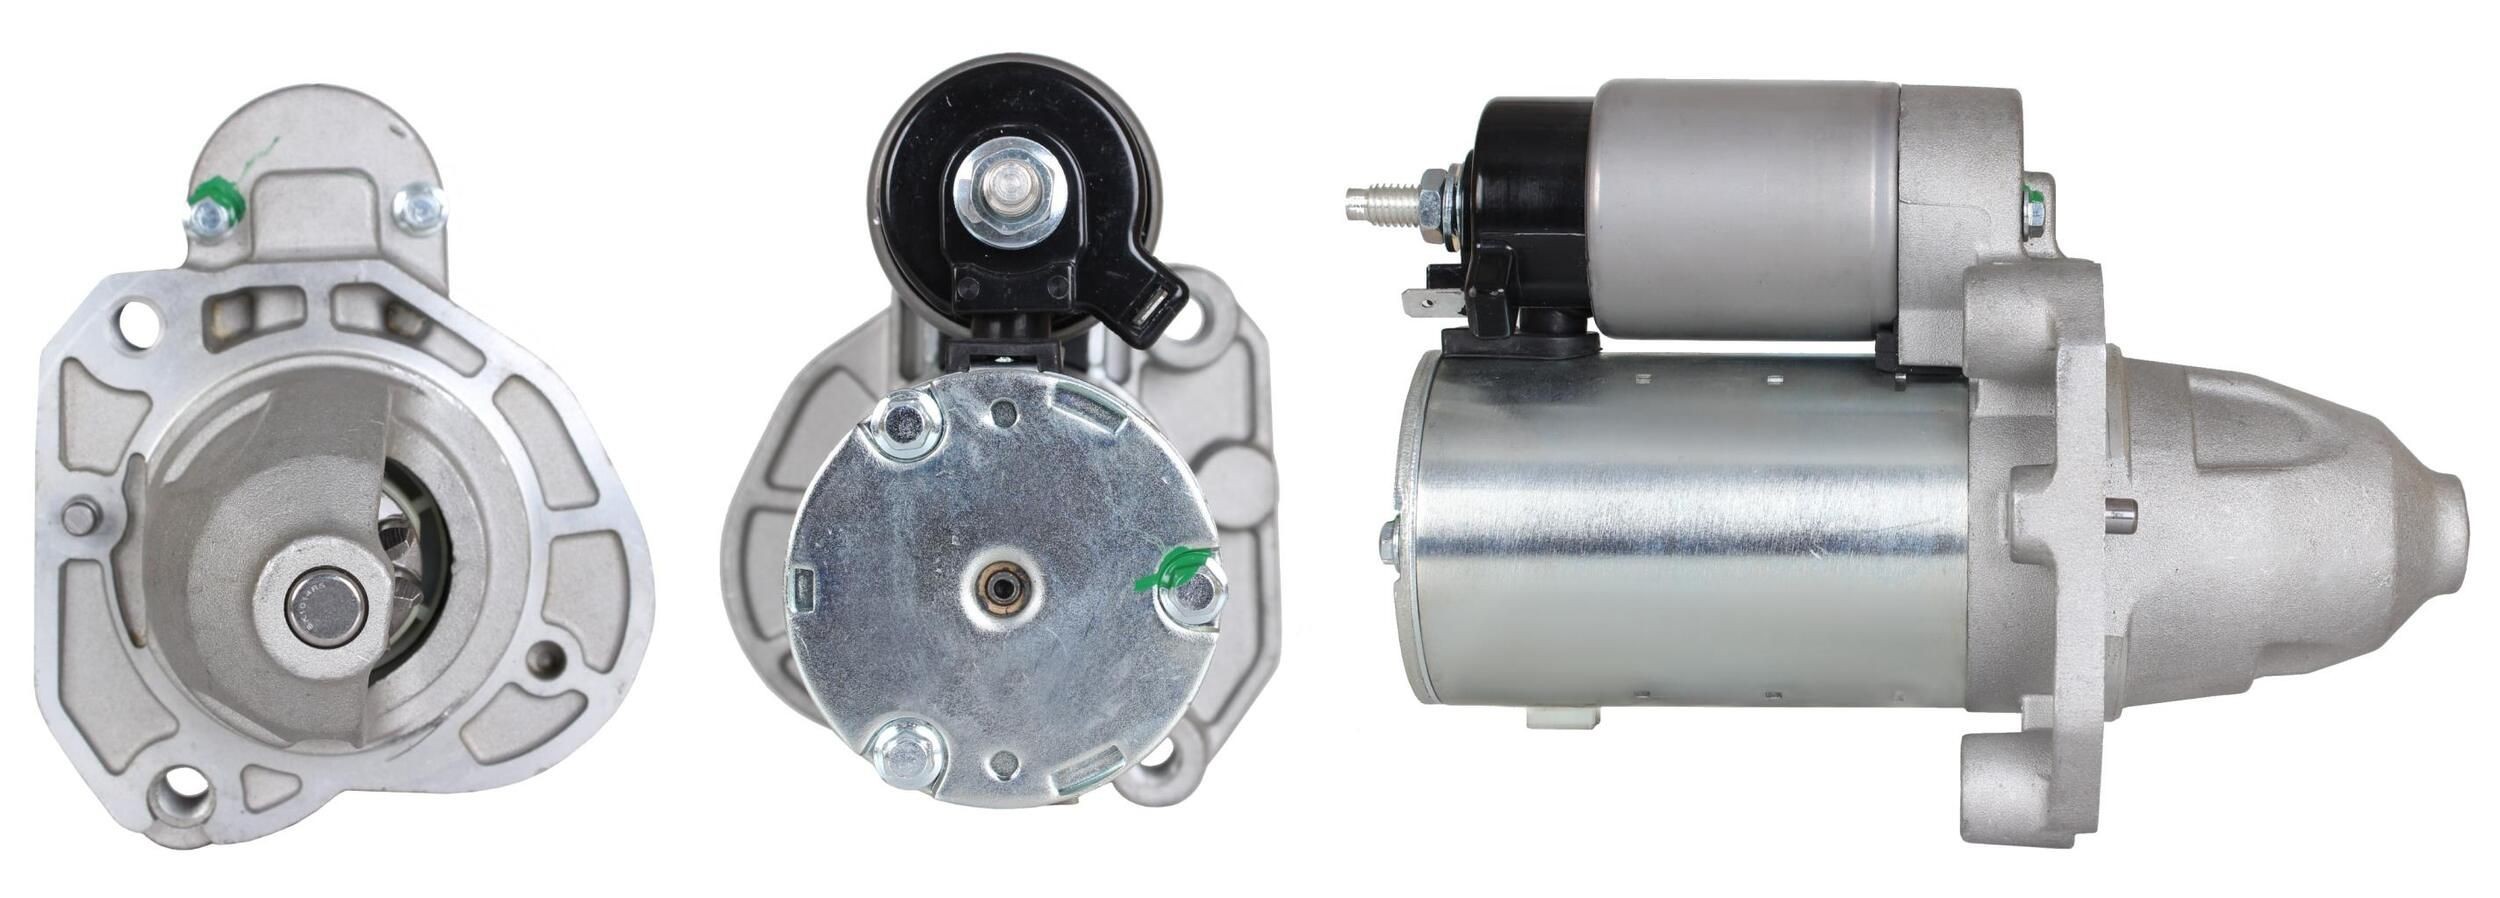 ELSTOCK 25-5262 Starter motor JEEP experience and price